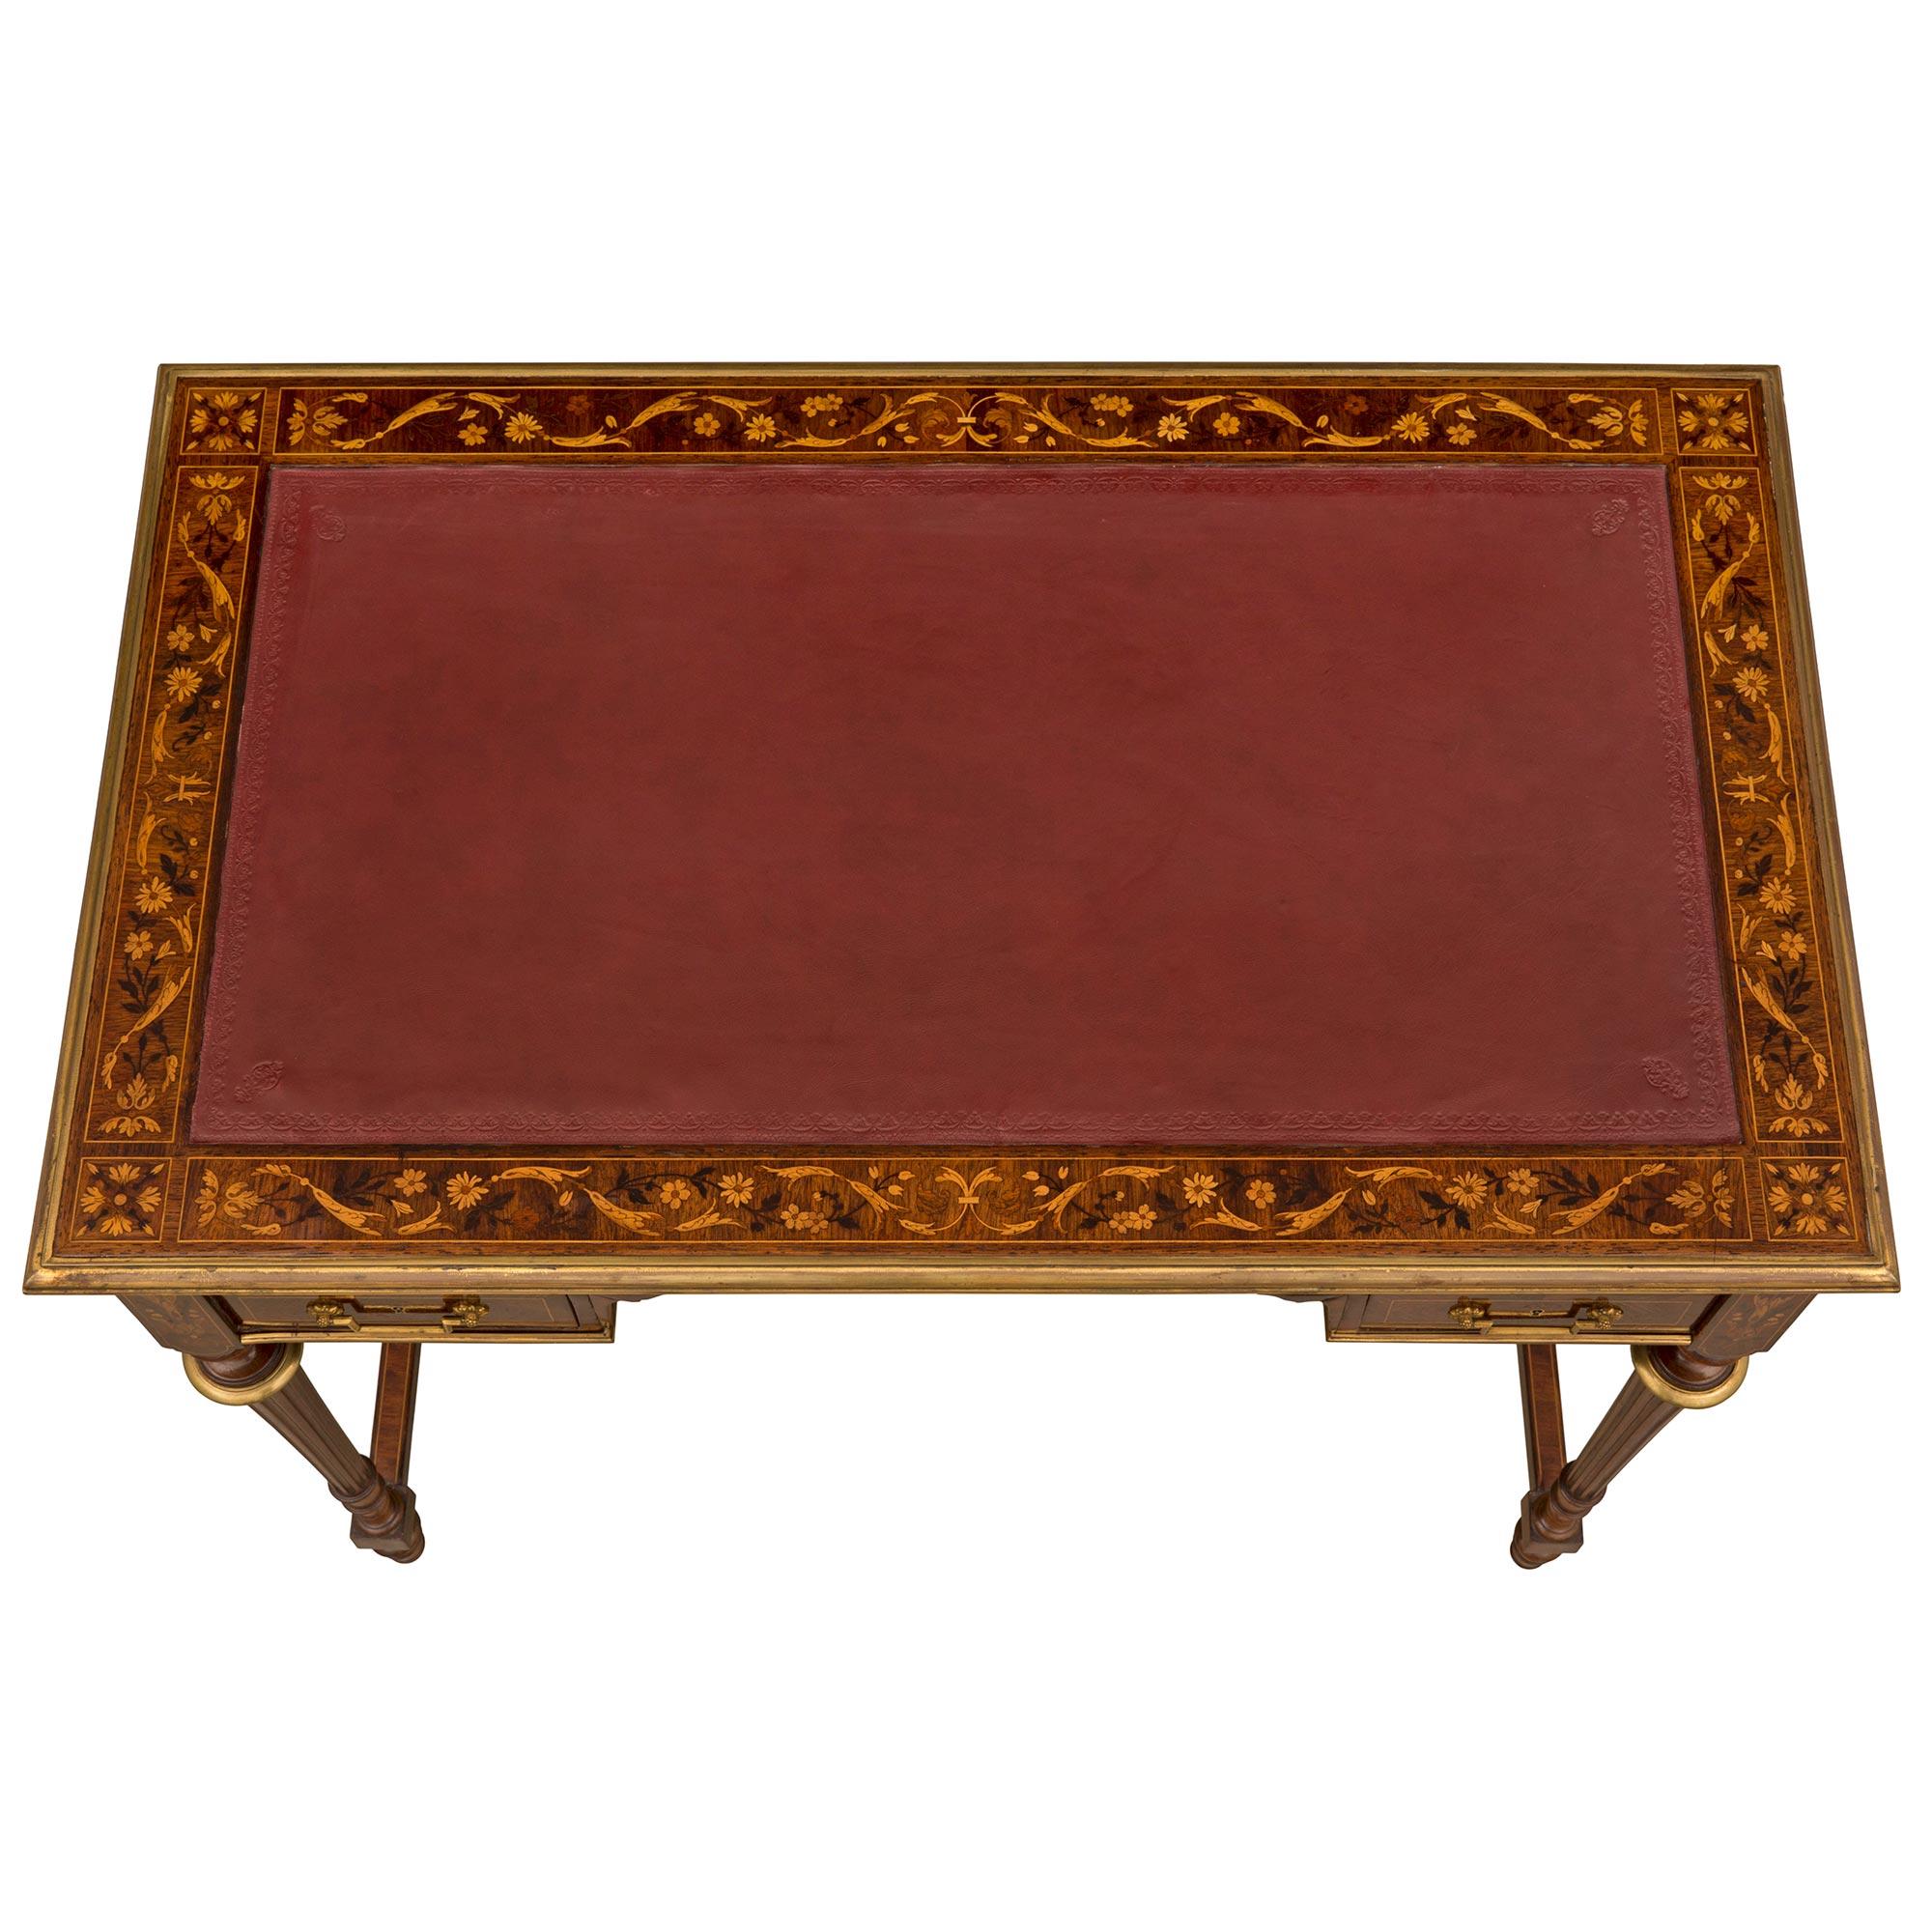 An elegant and very high quality English early 19th century Louis XVI st. Kingwood, Tulipwood, and ormolu desk signed HOBBS. The five drawer desk is raised by beautiful and unique topie shaped feet below block reserves each connected by a fine